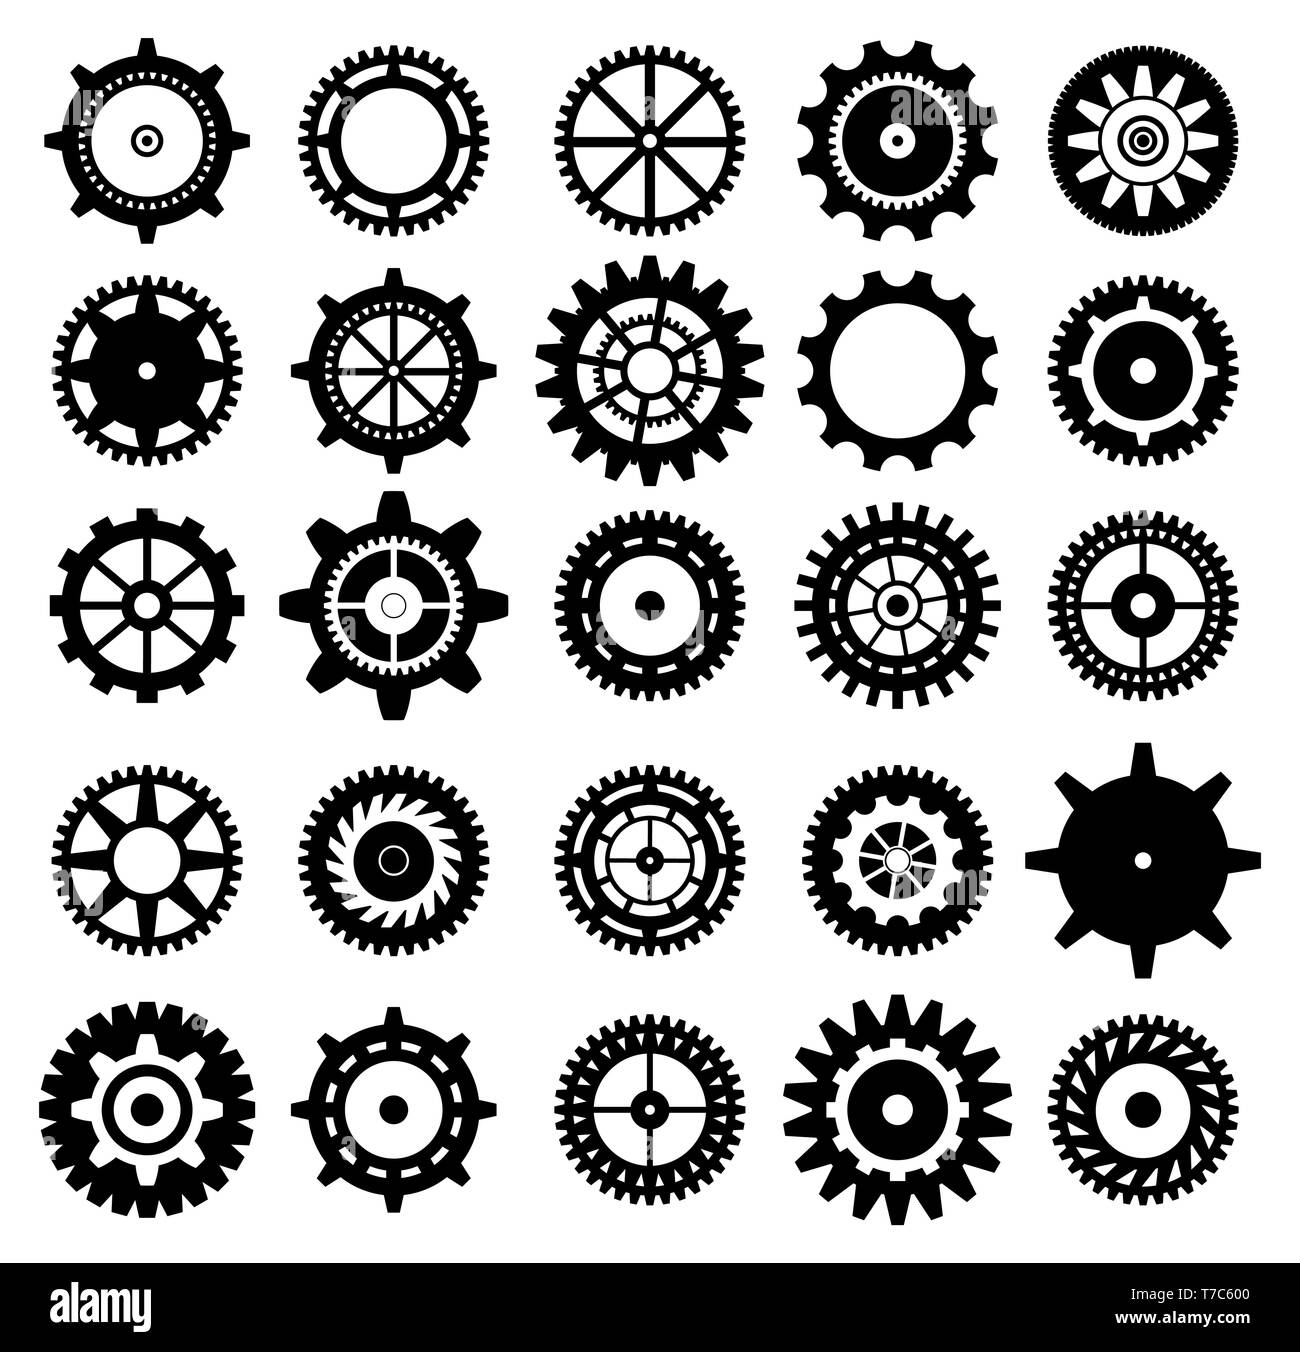 Collection of retro gear icon. Vector vintage transmission cogwheels and  gears. Can be used for industrial, technical, mechanical and steampunk  design Stock Photo - Alamy